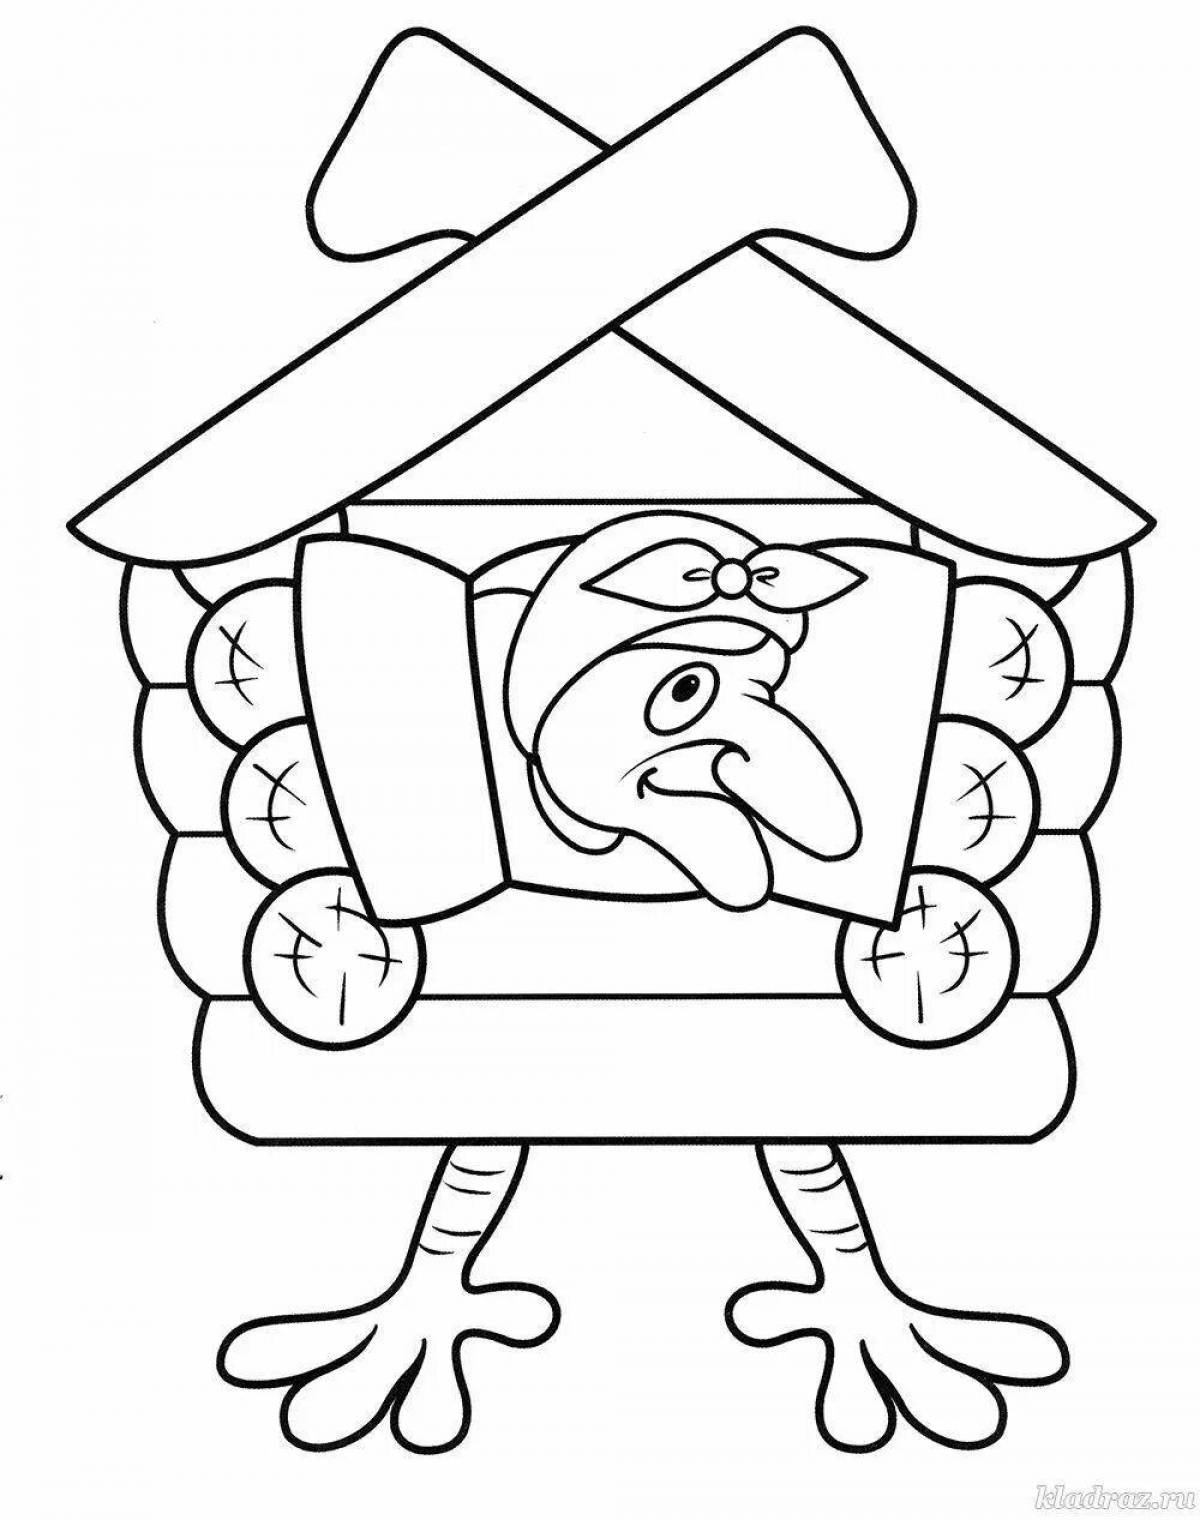 Great fairy hut coloring book